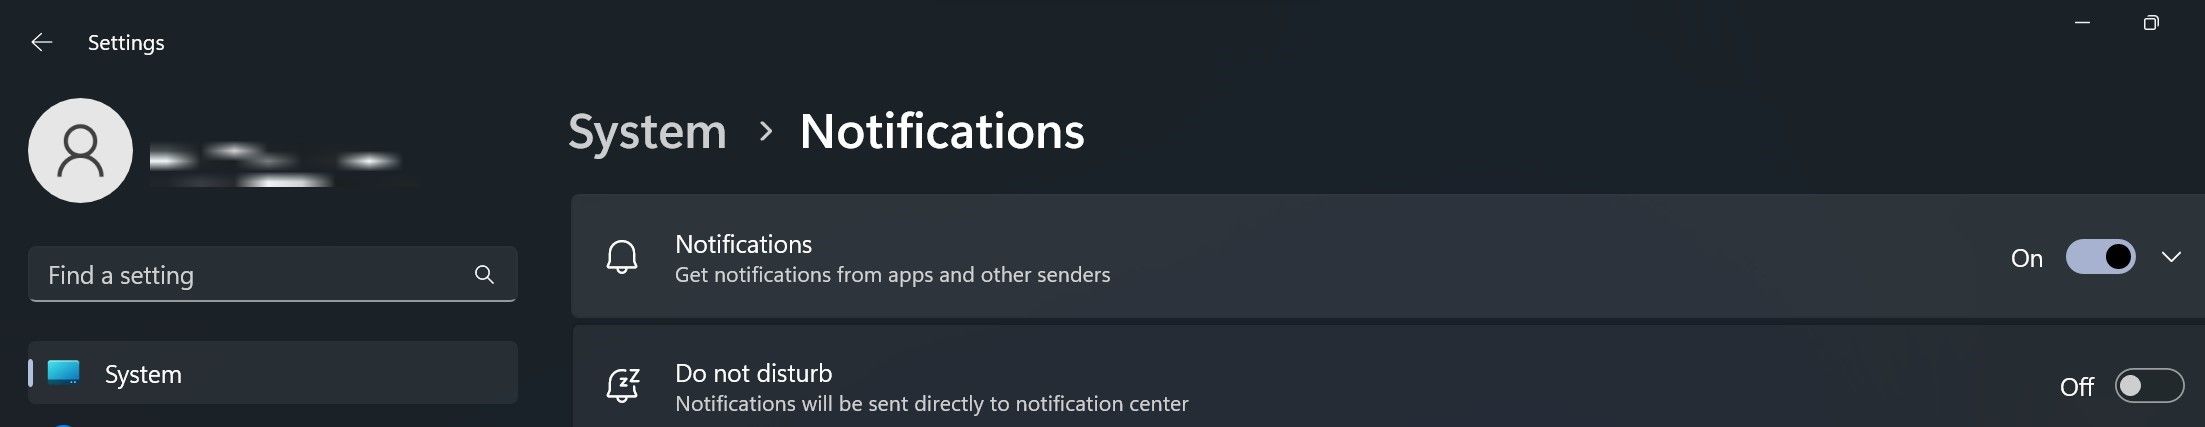 Turn Off the Toggle Next to Notifications to Disable Notifications